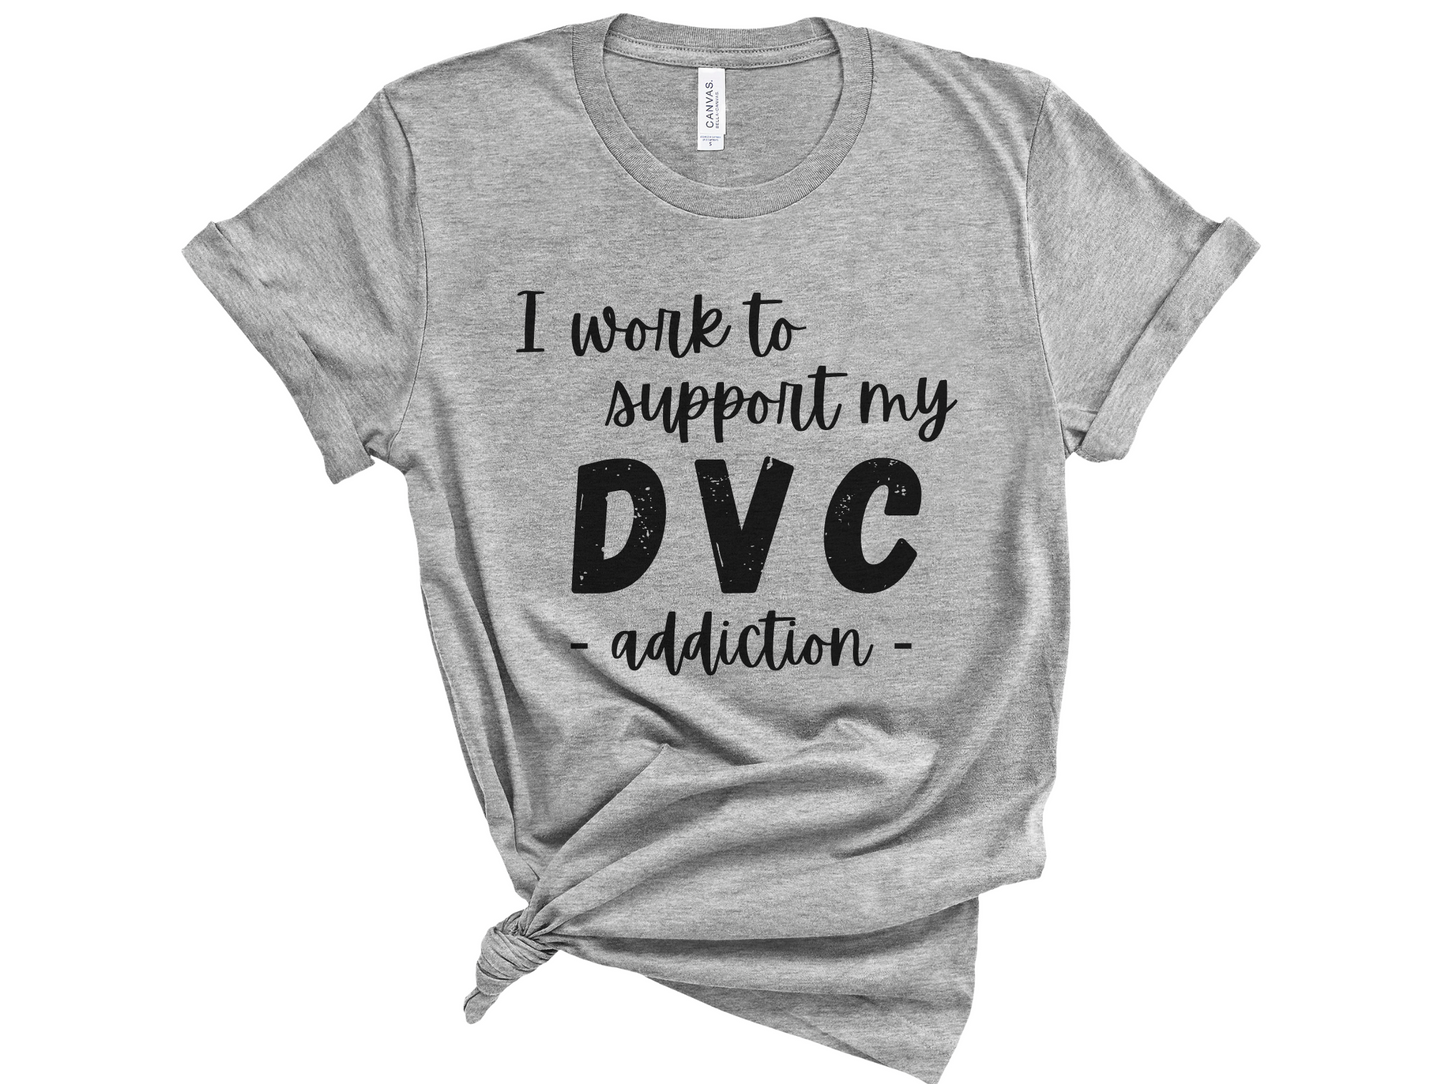 I Work to Support My DVC Addiction Unisex T-Shirt